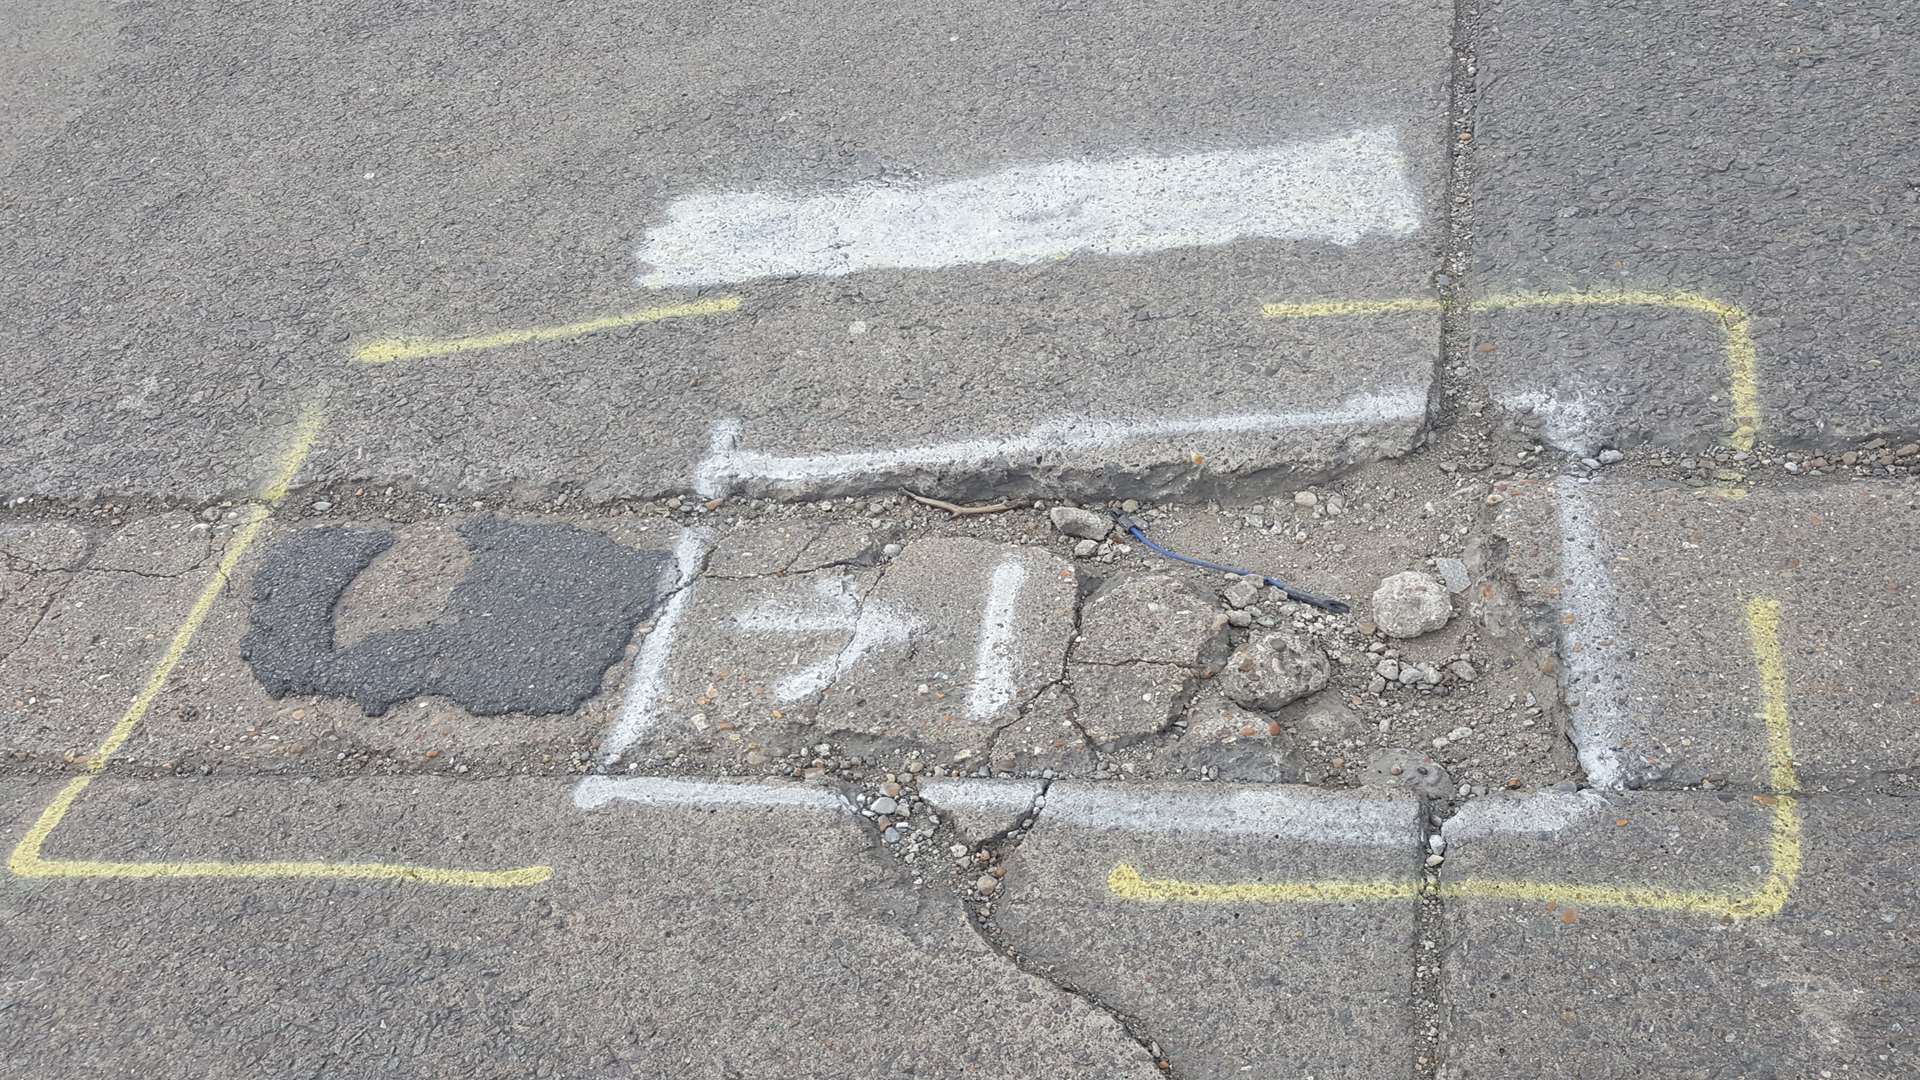 A pothole with the word 'KILLER' written over the top of it has been blocked out